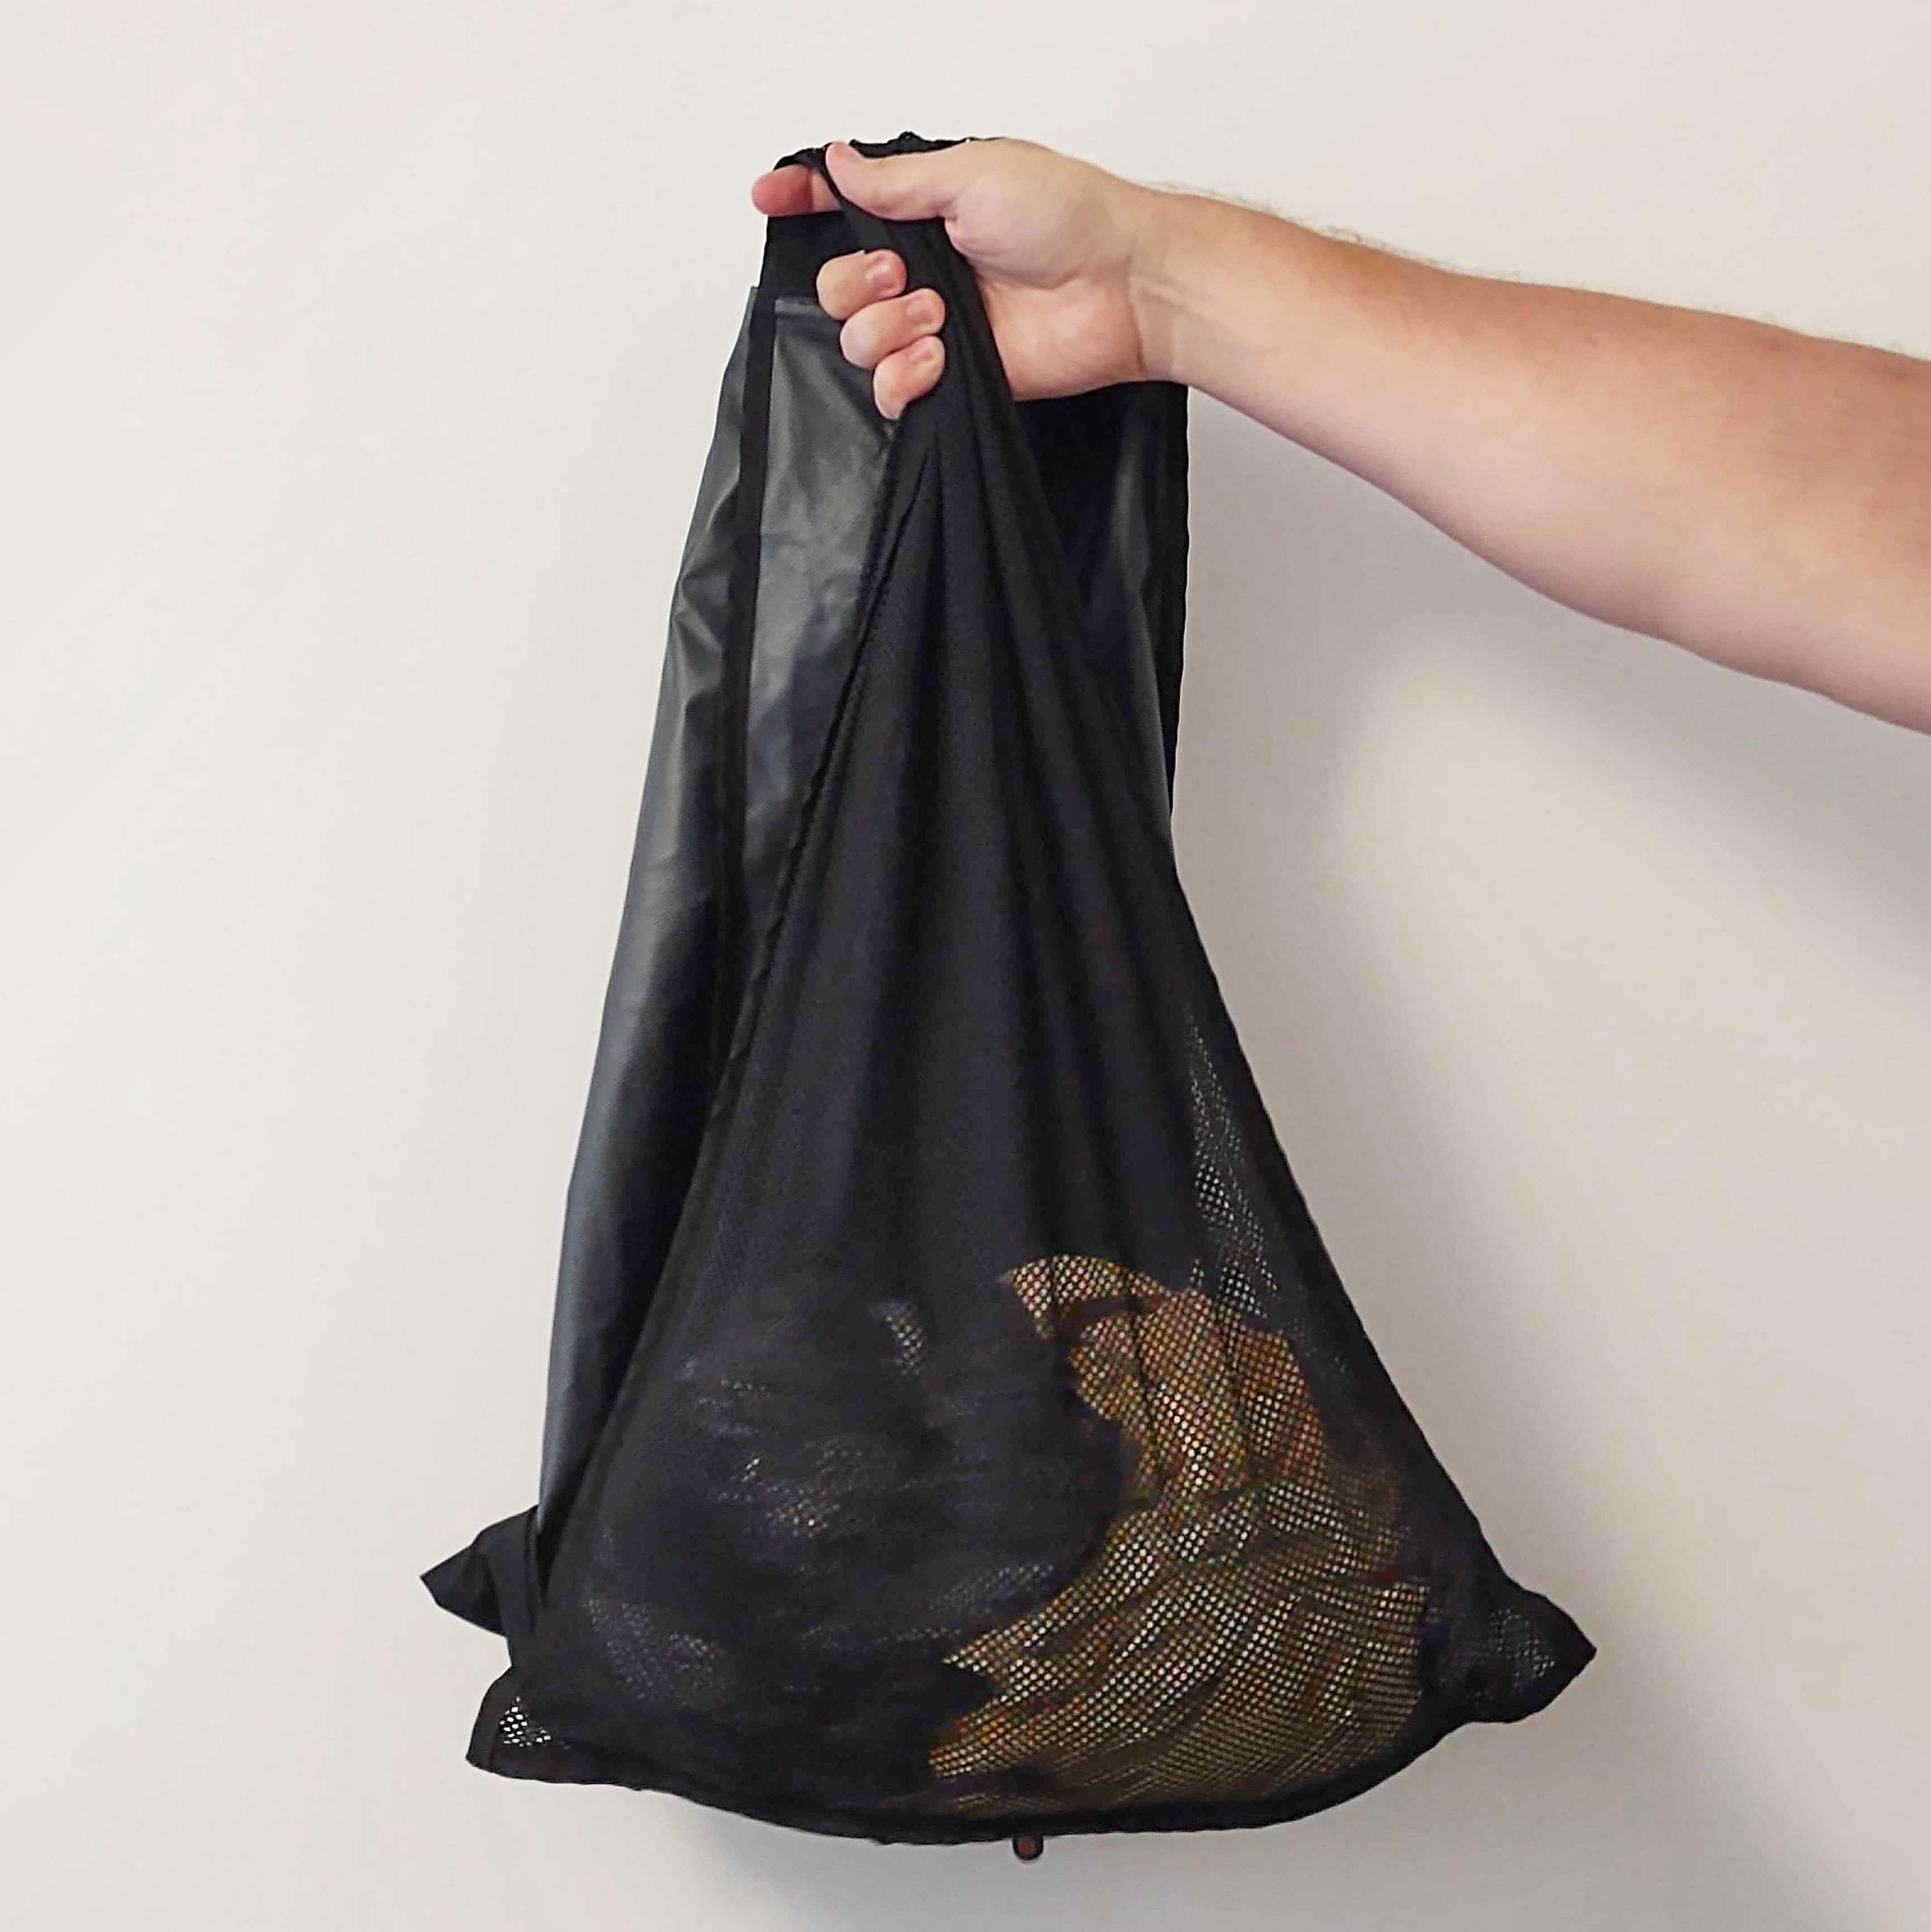 We Tried a Self-Cleaning Gym Bag That Keeps Your Clothes Fresh